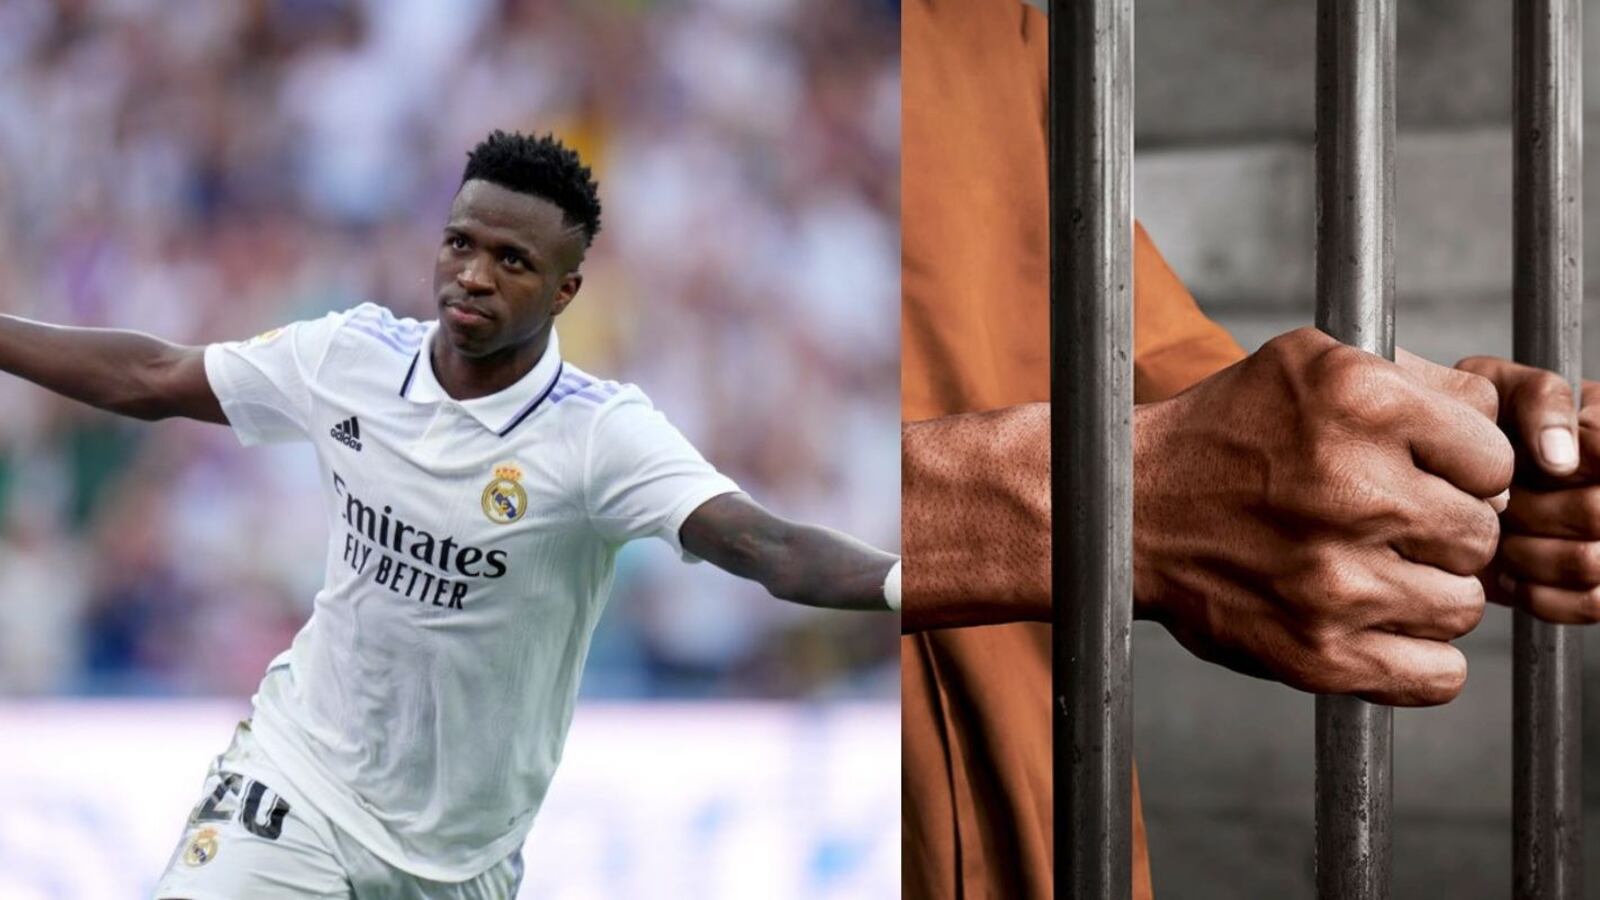 He was a star at Real Madrid, he was better than Vinicius, now he can get behind bars